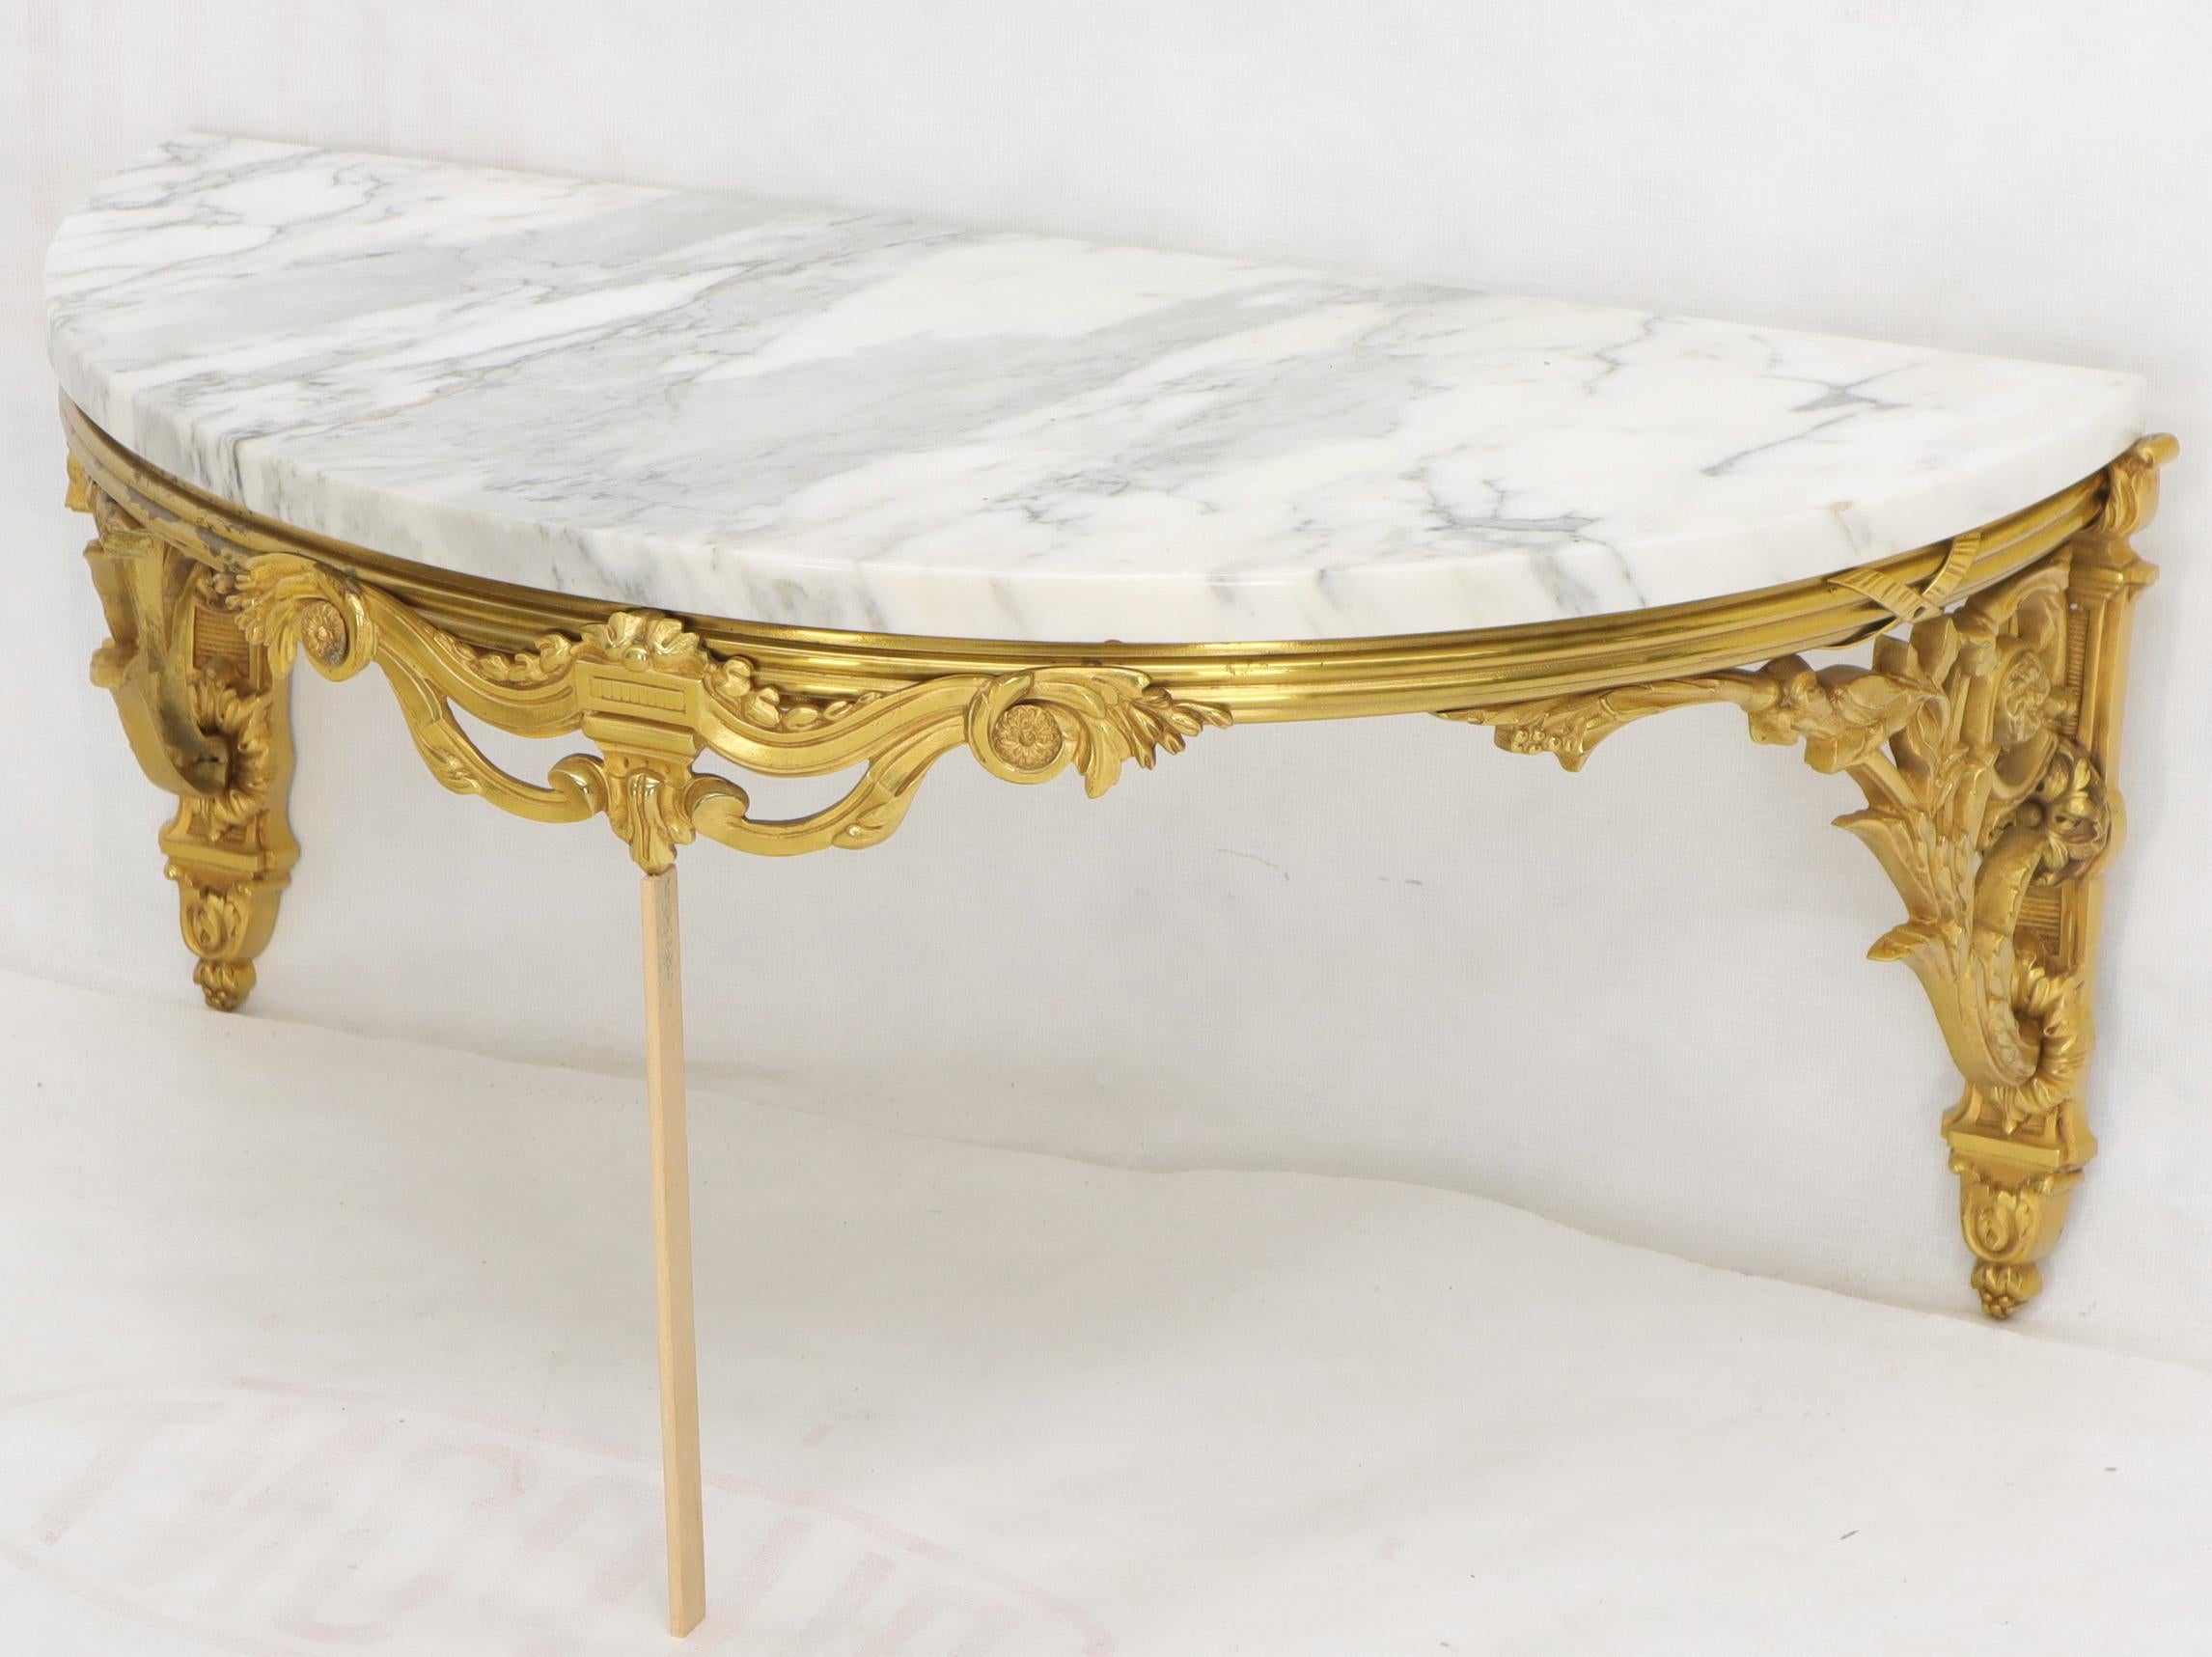 Heavy gold tone bronze marble top Demilune console hanging table.